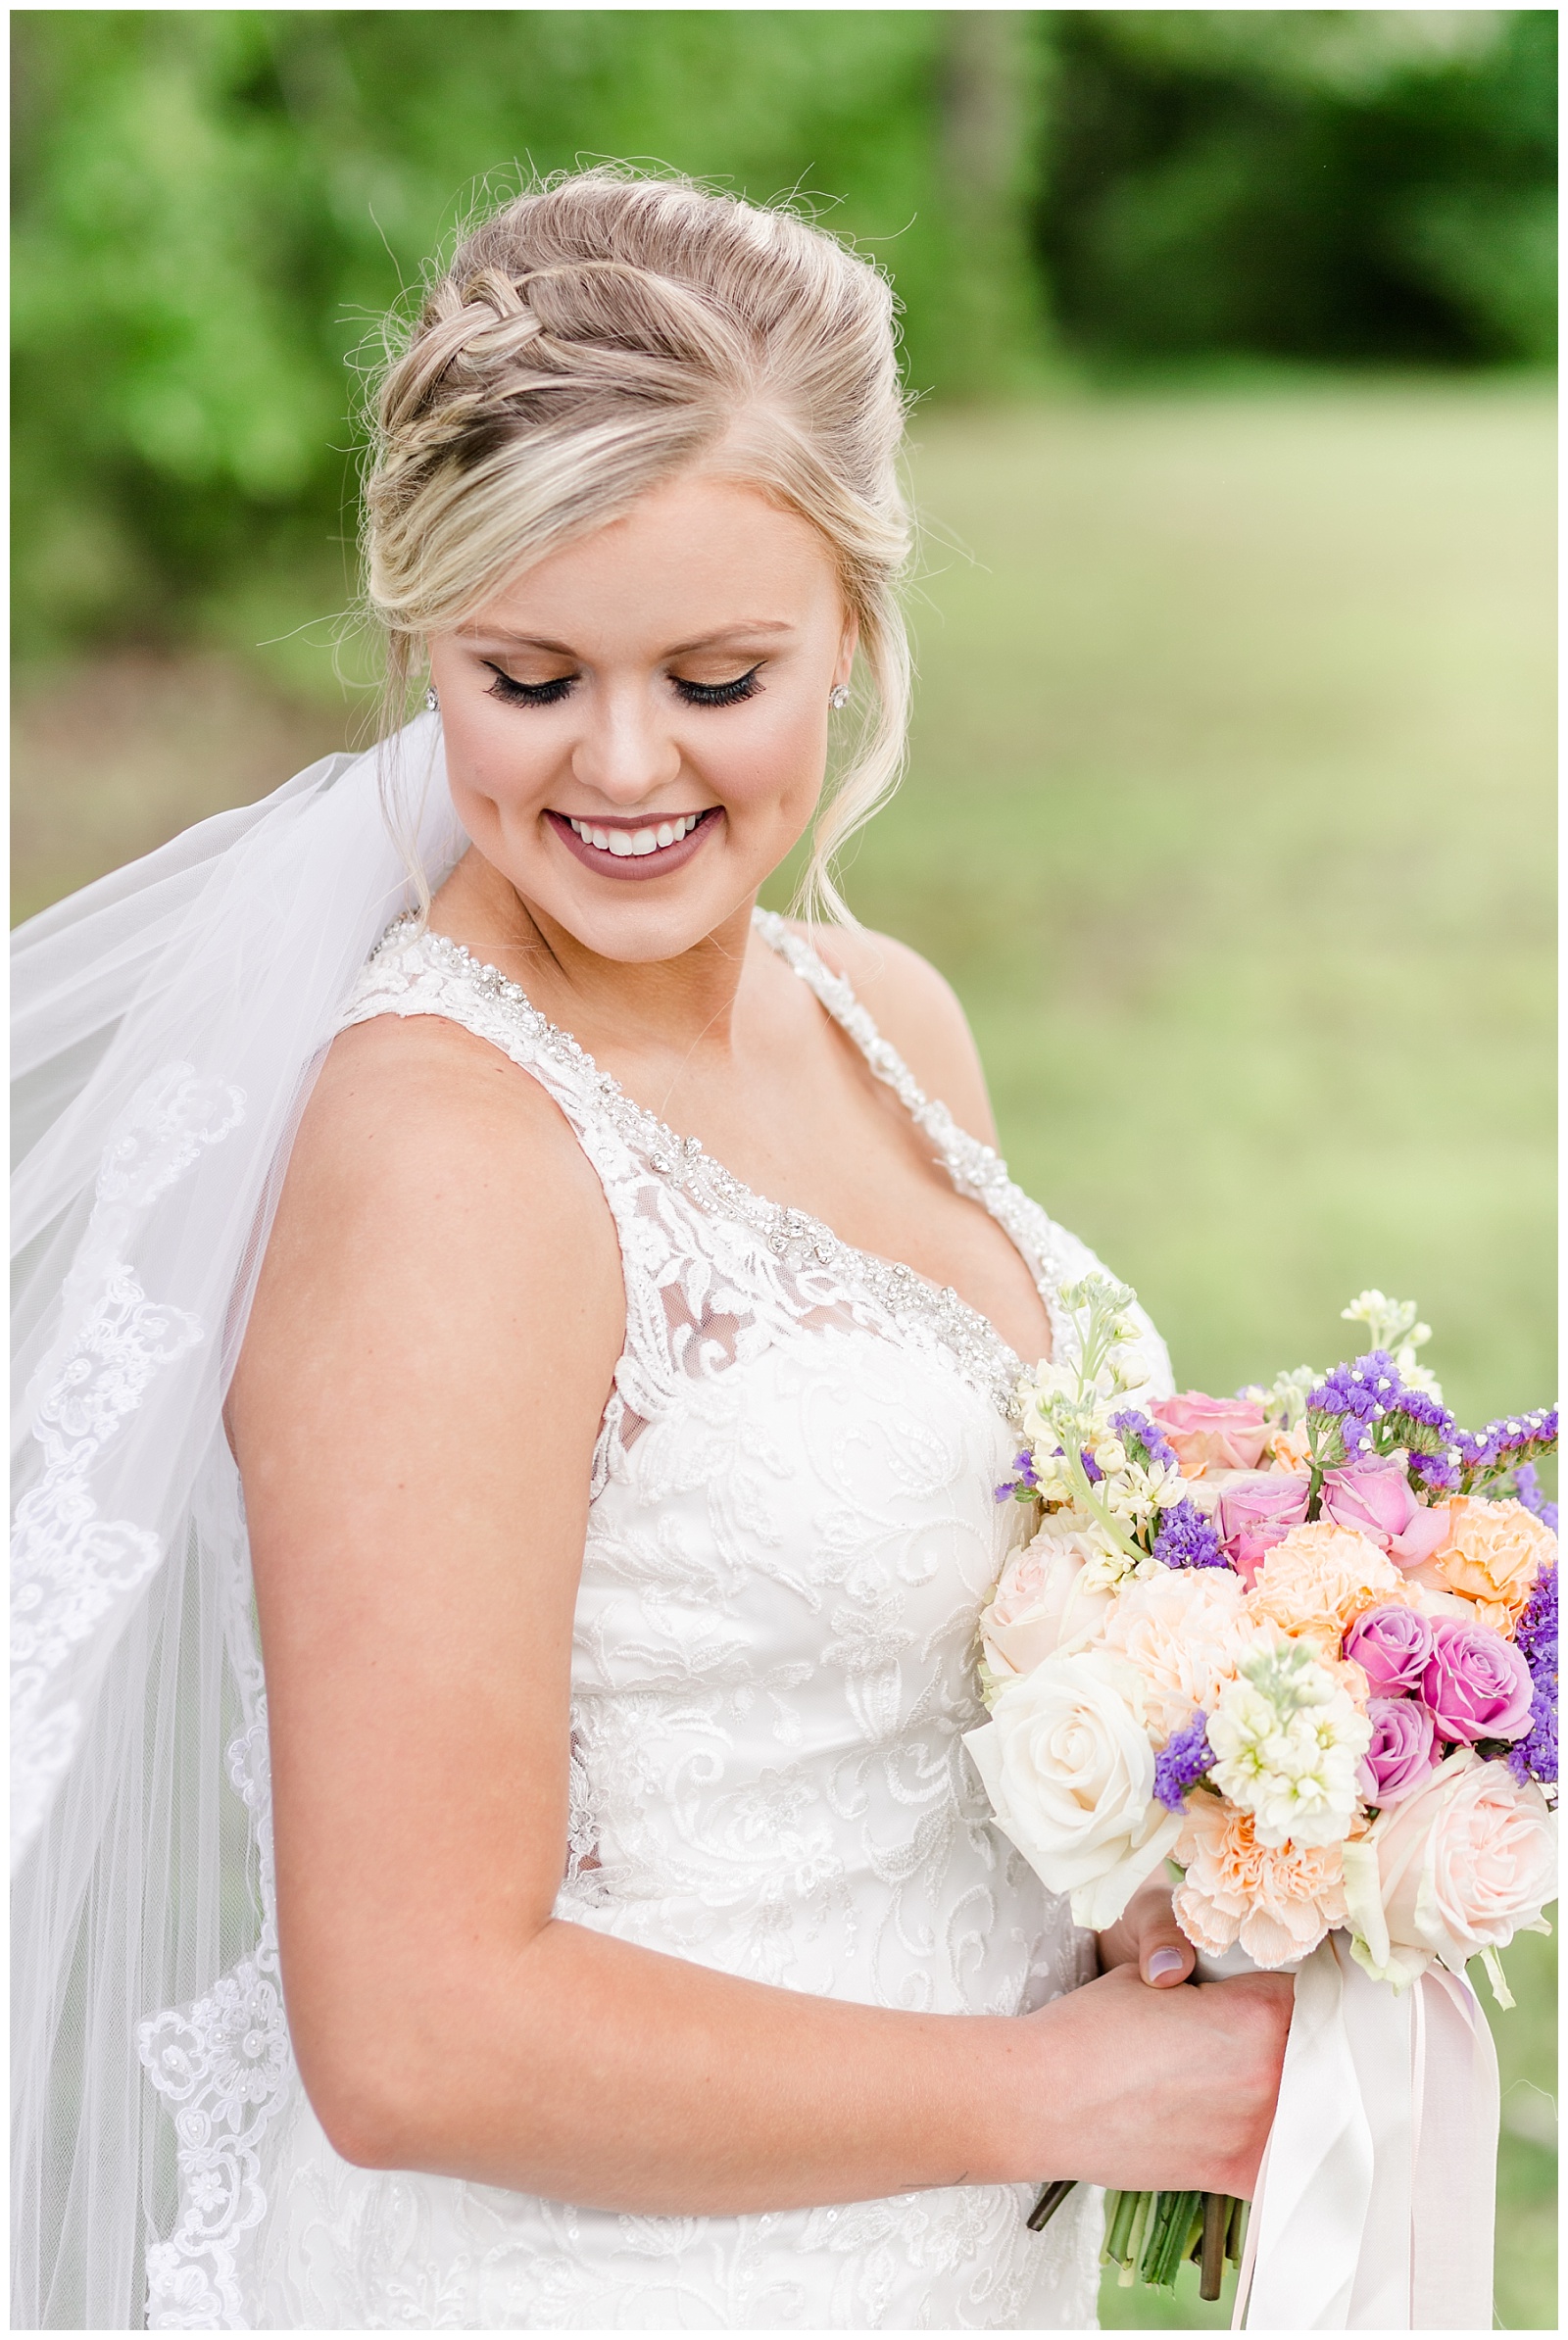 bridal portrait with purple and gold bouquet, flowy veil, mermaid style wedding dress, and an updo with braid